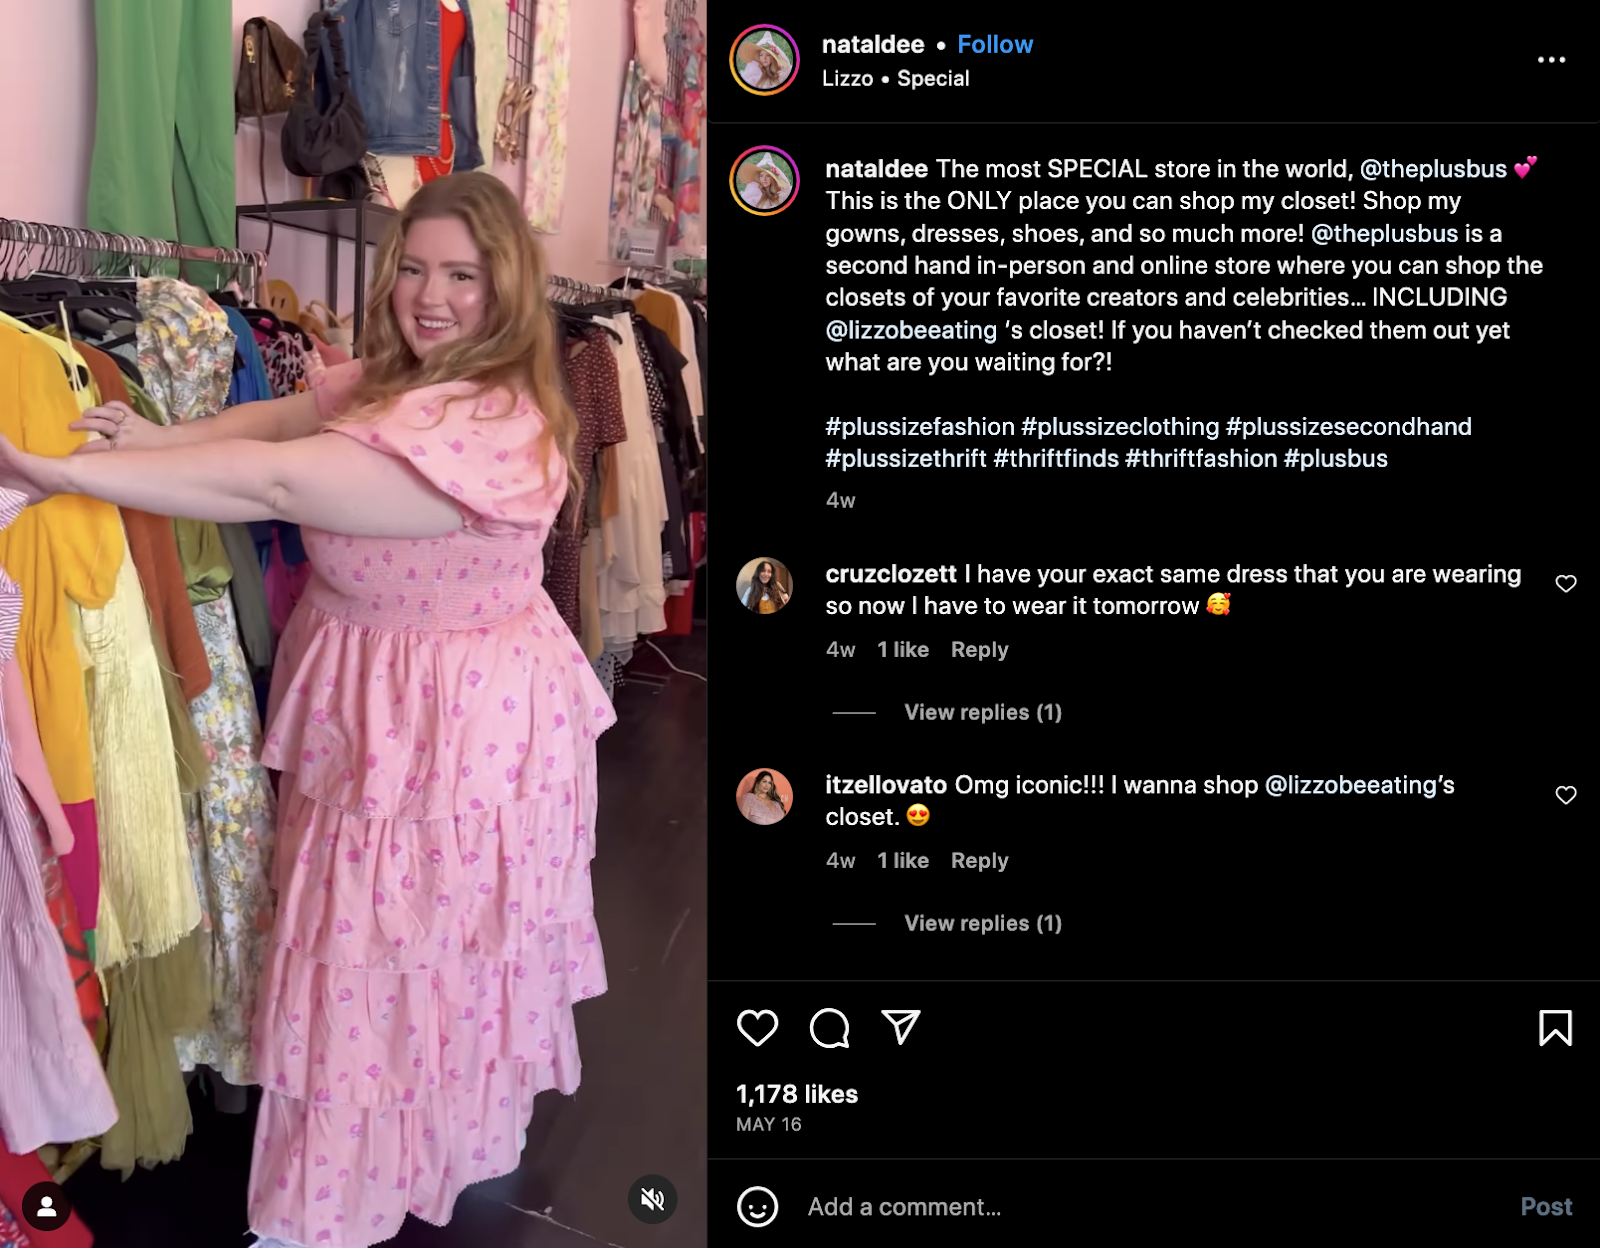 Instagram influencer Natalie smiles at the camera while looking through a rack of dresses at a second-hand plus-size clothing store.